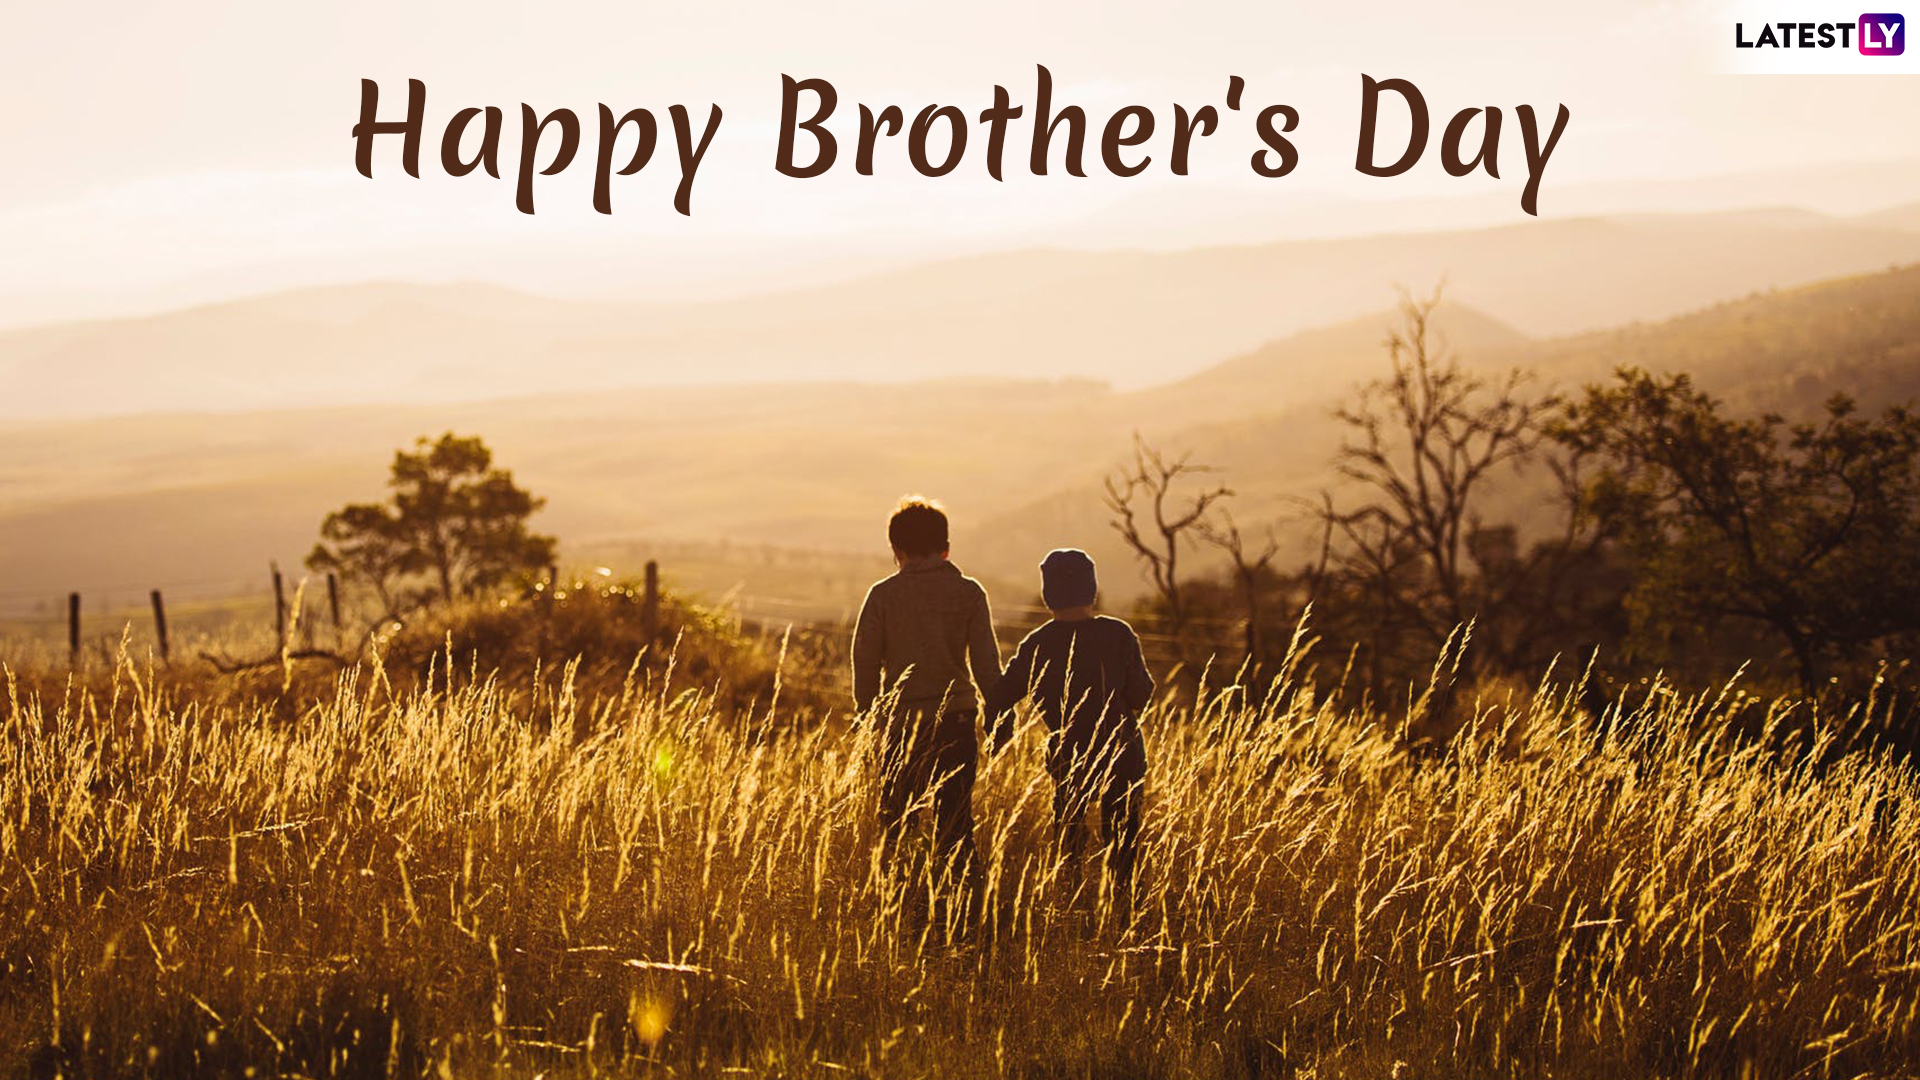 Happy Brothers Day Black Background White Stock Illustration 1410864926 |  Shutterstock